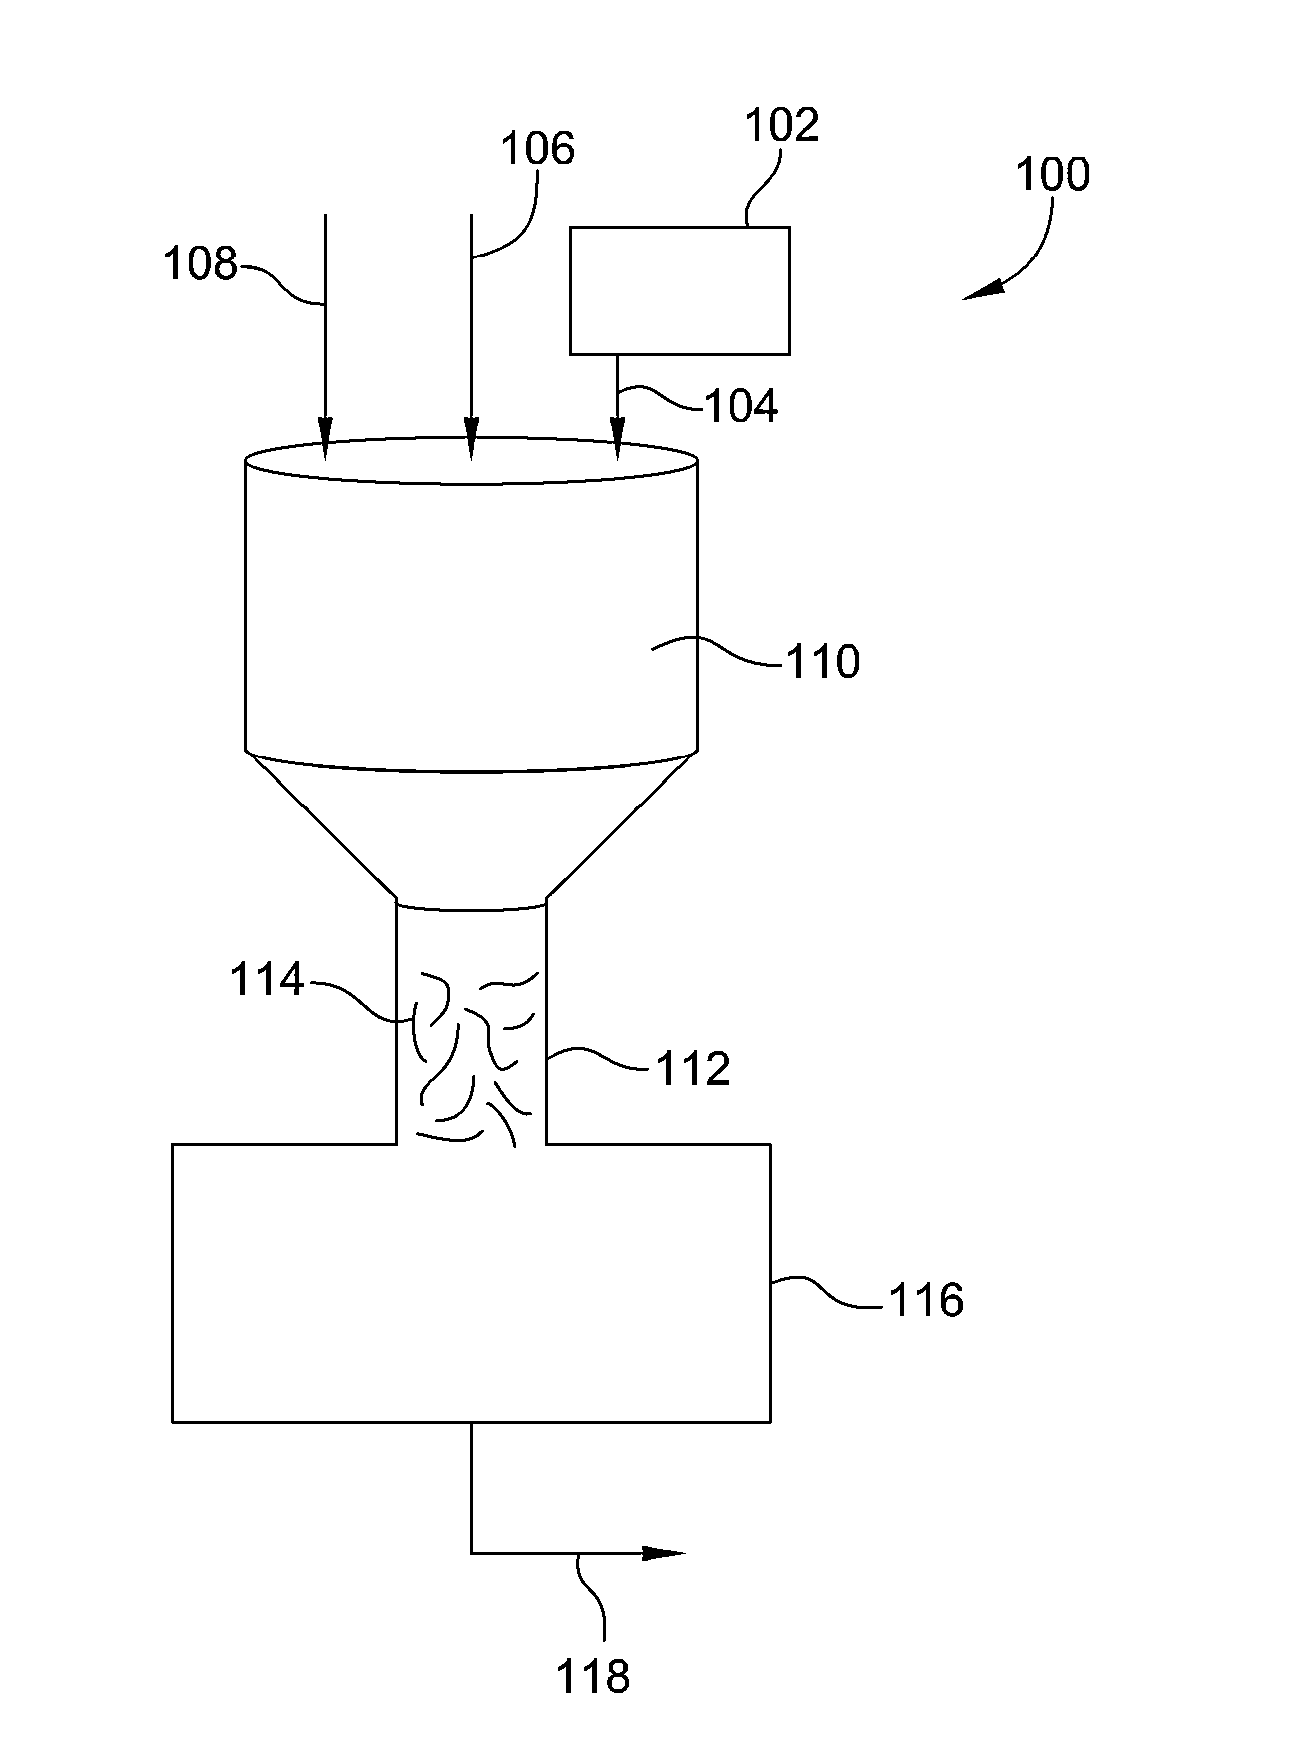 Process and system for removing urea from an aqueous solution